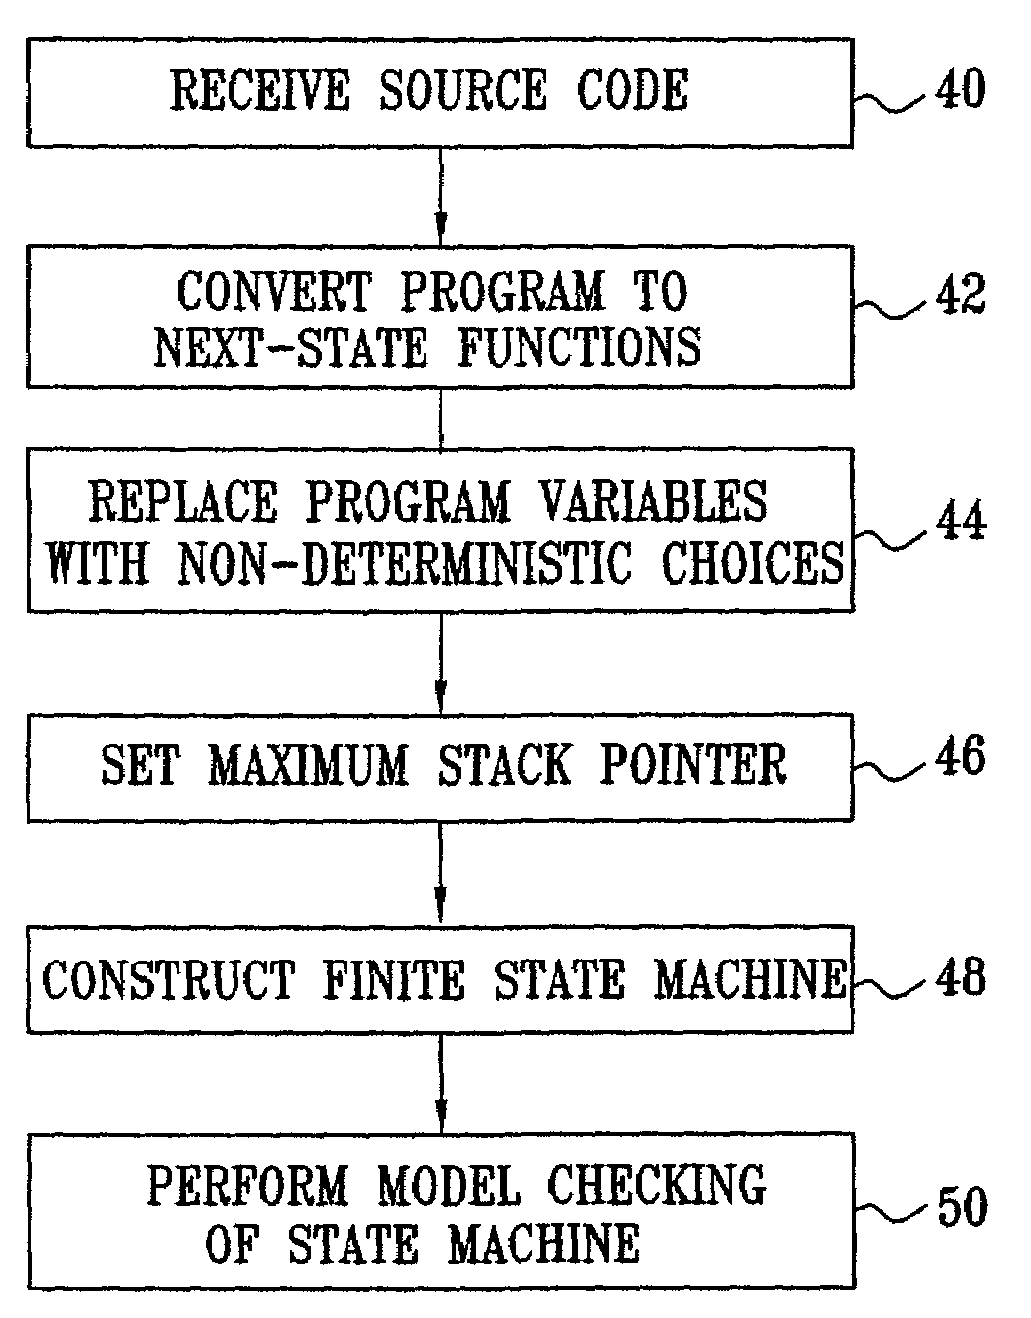 Automatic abstraction of software source